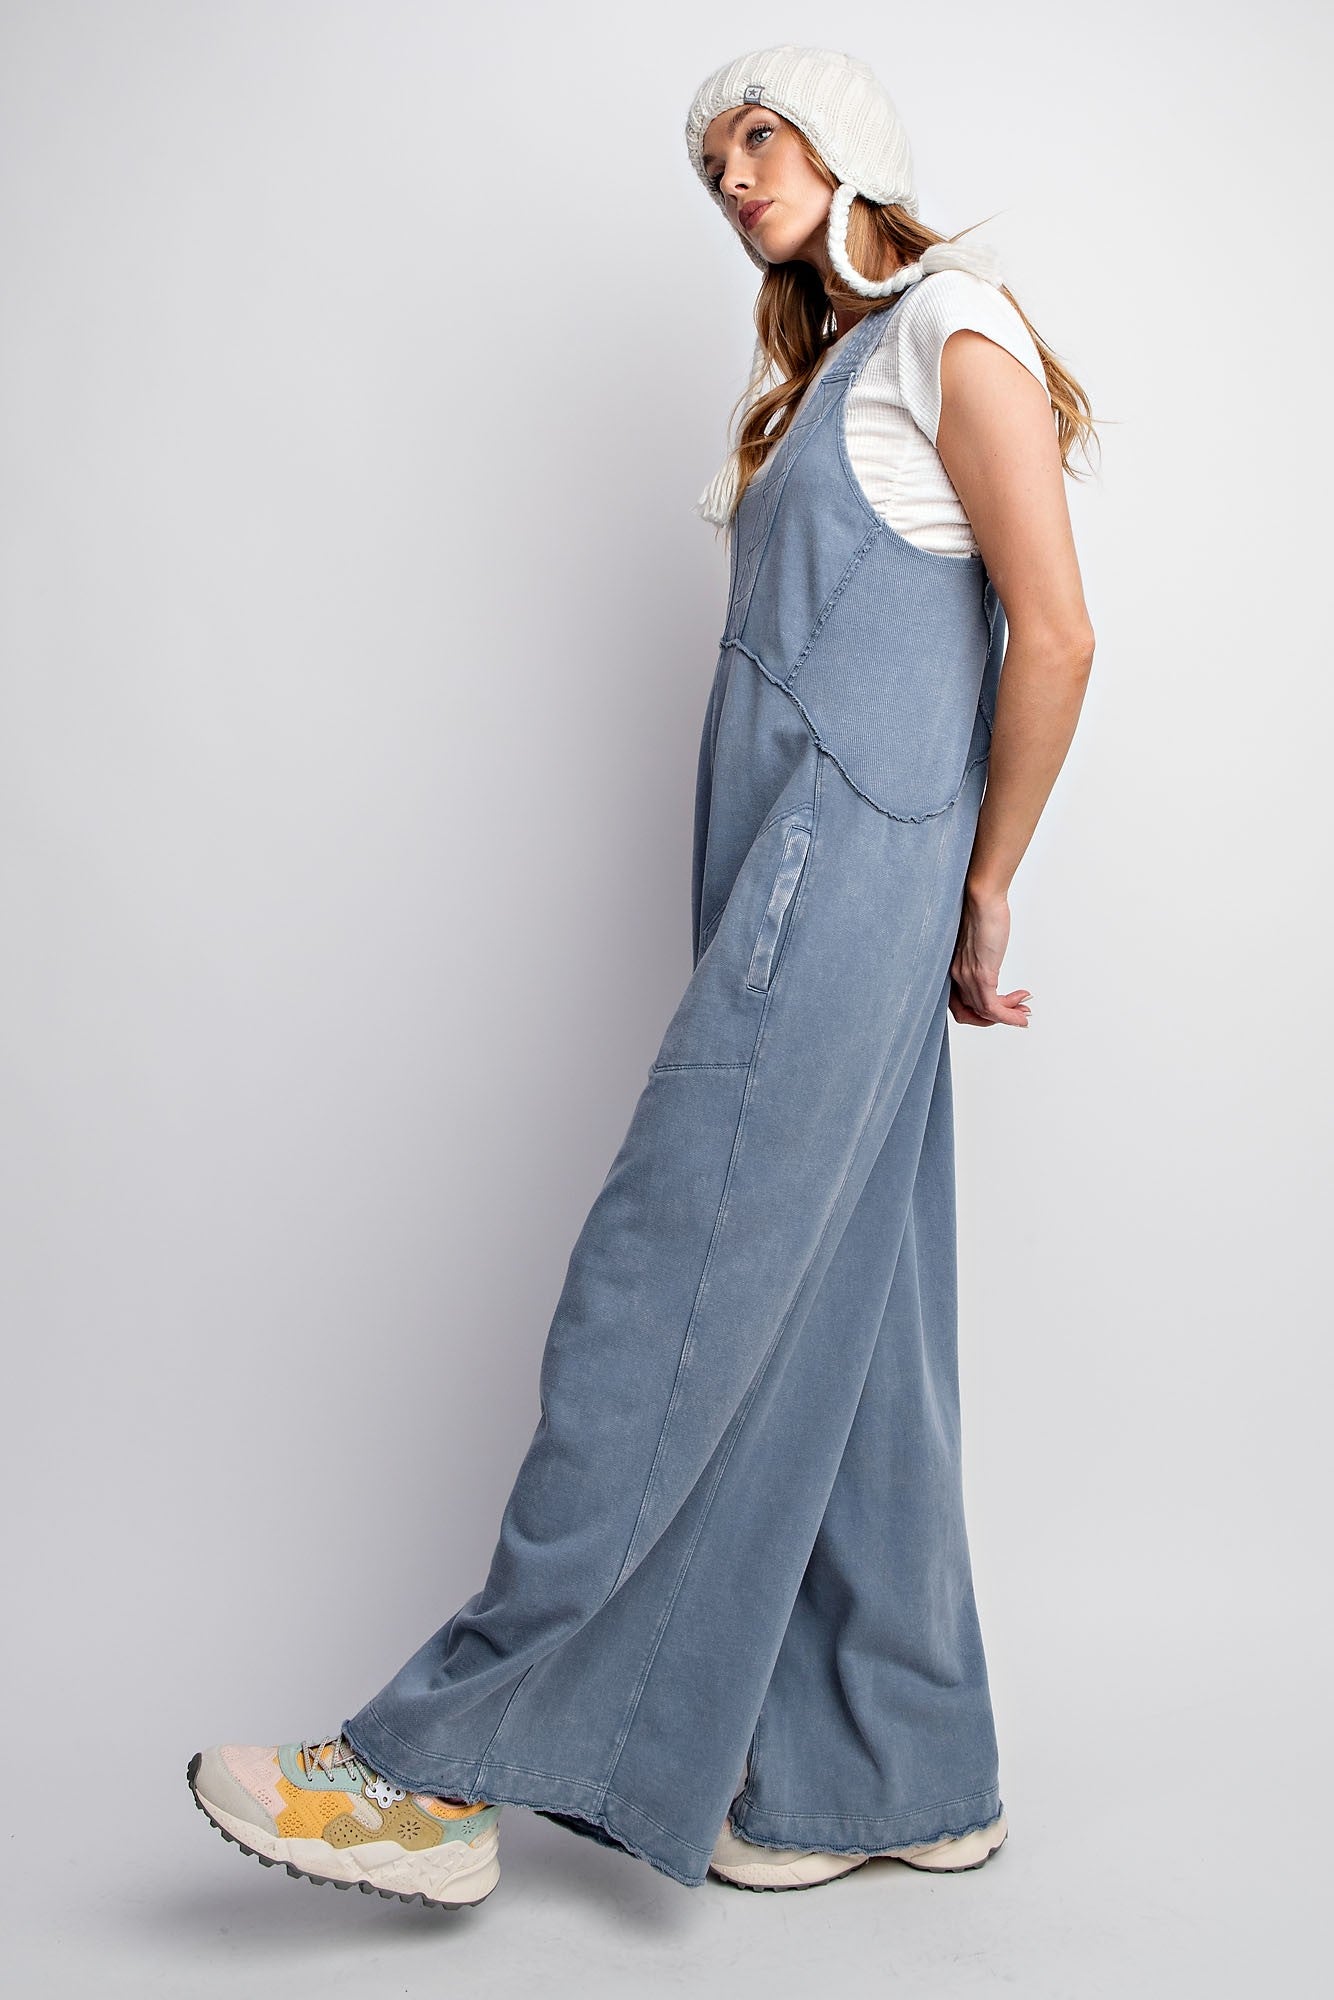 Easel Mineral Washed Terry Knit Jumpsuit in Denim ON ORDER – June Adel